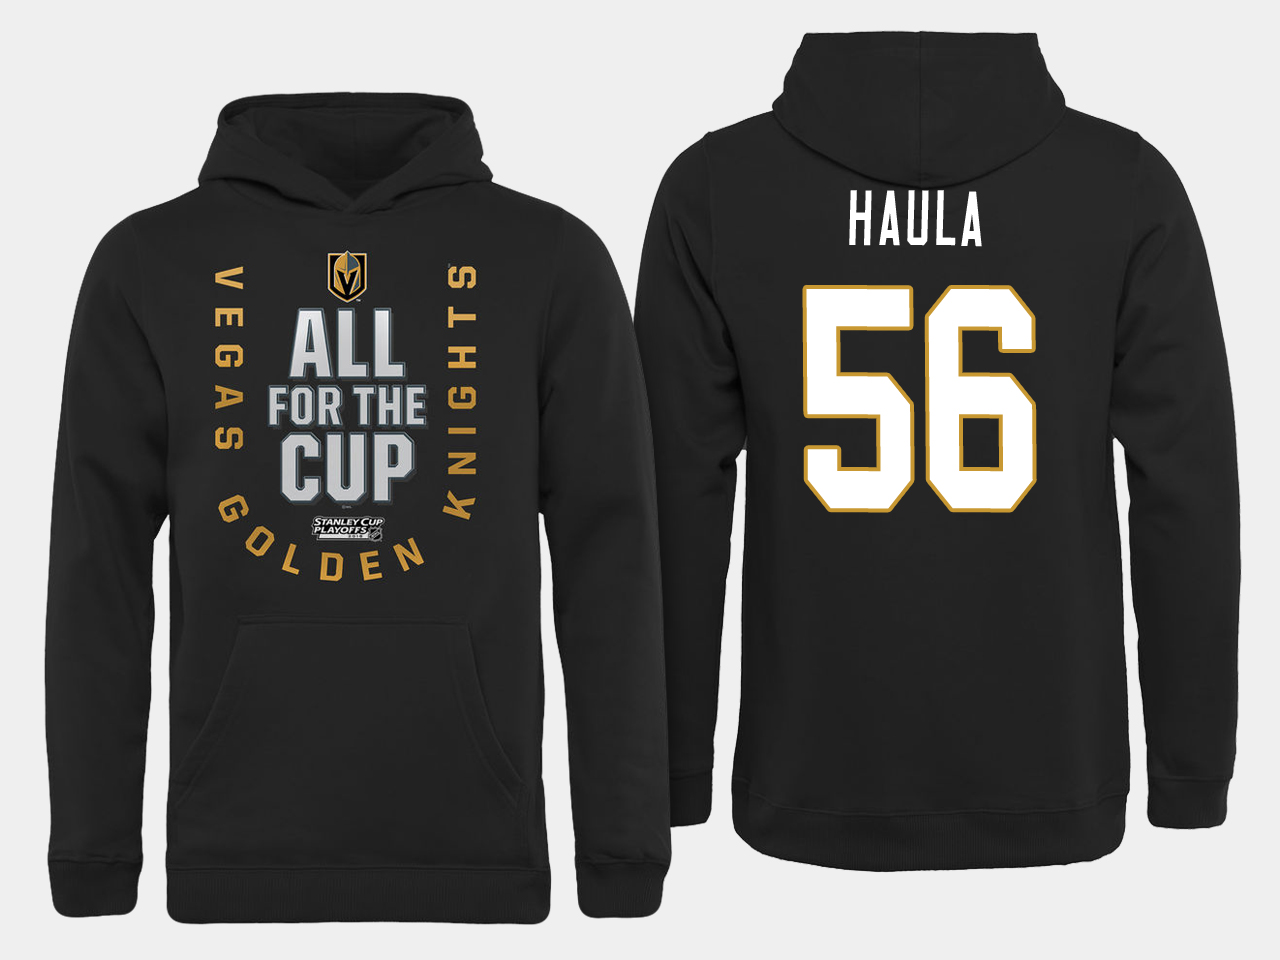 Men NHL Vegas Golden Knights 56 Haula All for the Cup hoodie